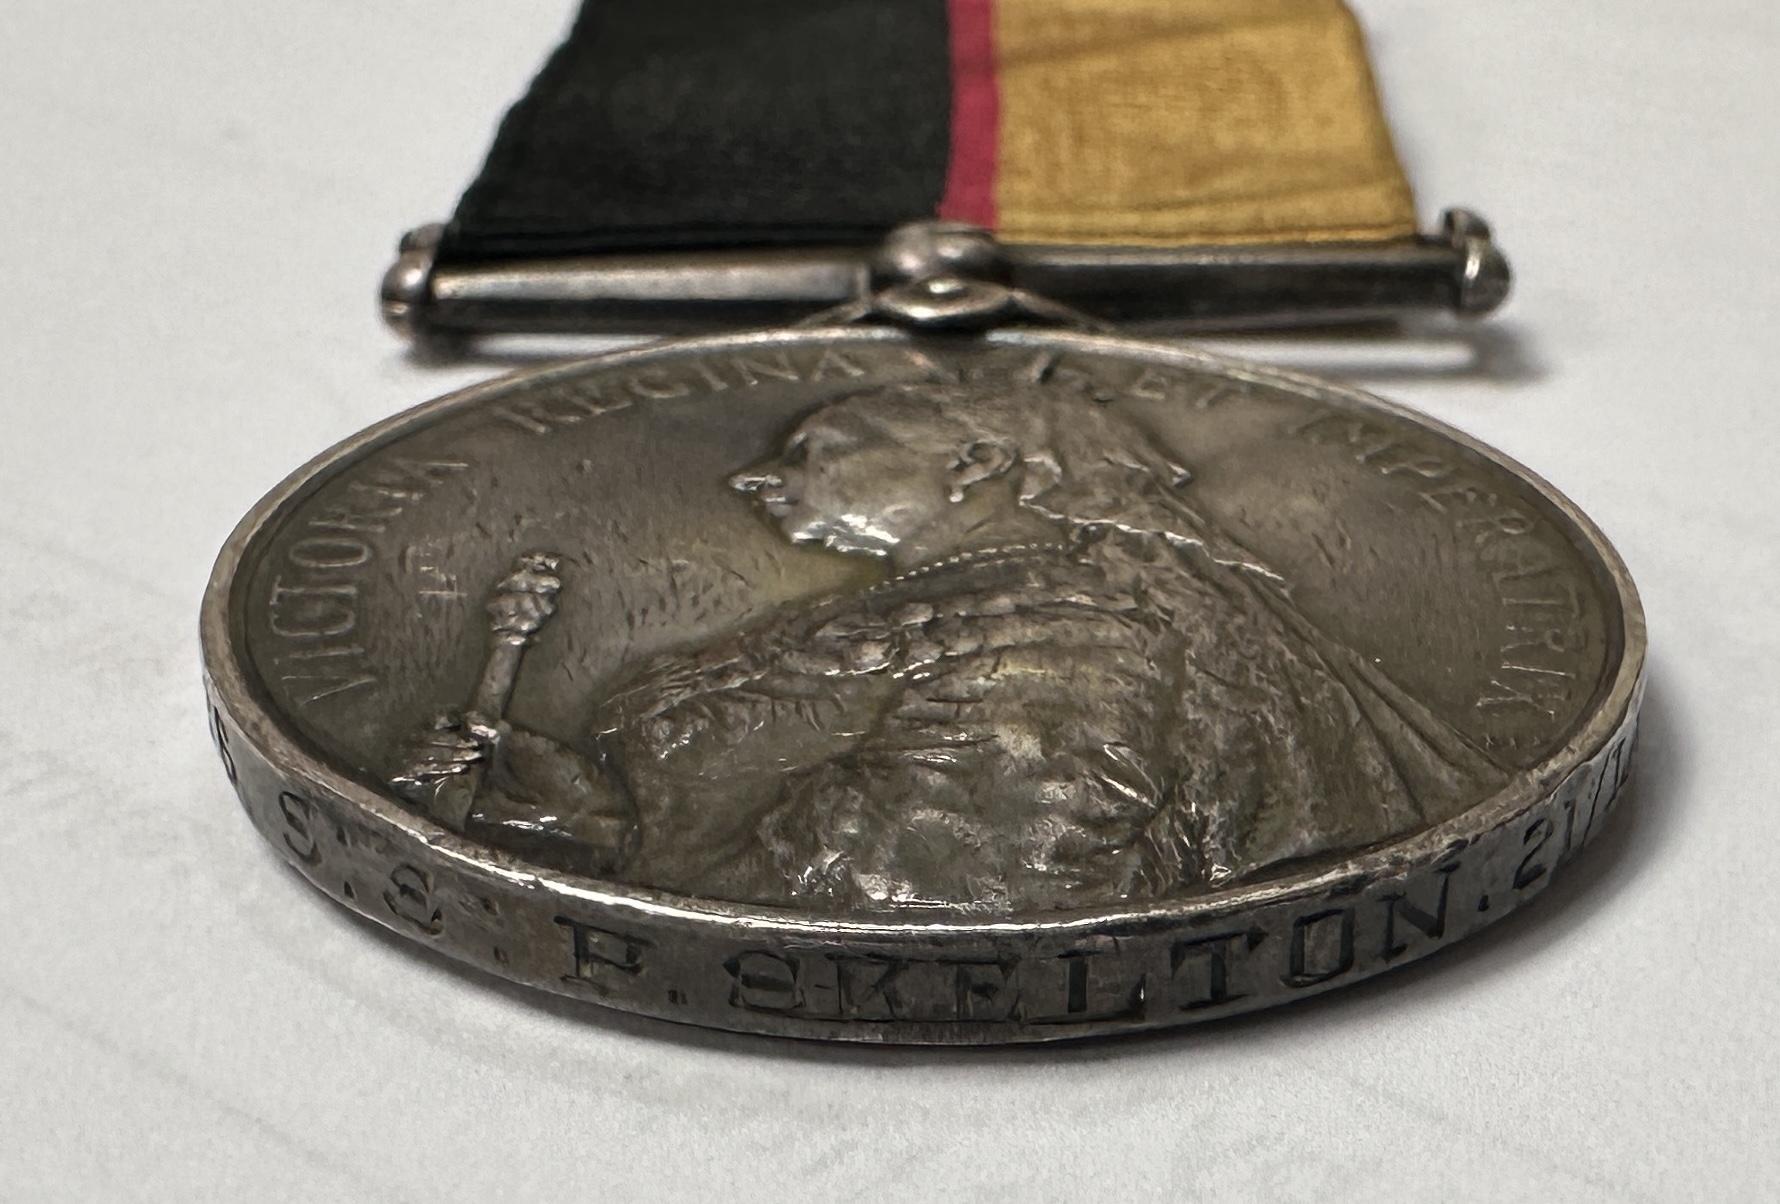 A Queen's Sudan 'Wound' Pair of Queen's Sudan Medal 1899 and Khedive's Sudan Medal with Khartoum - Image 5 of 5